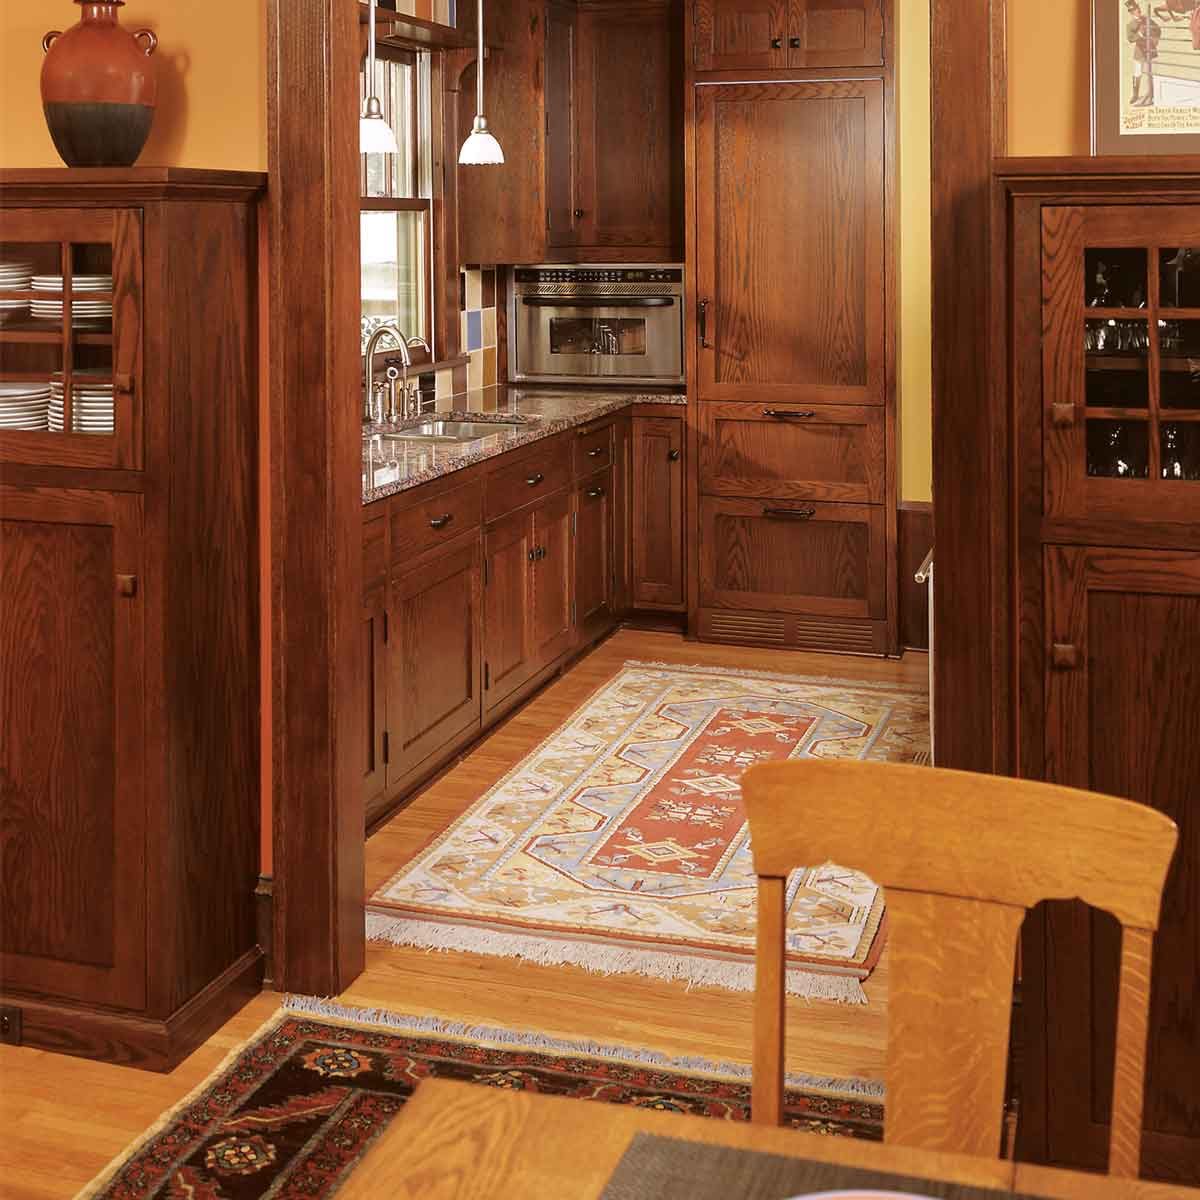 10 Clever Small Kitchen Ideas for Maximizing Space — Lord Decor